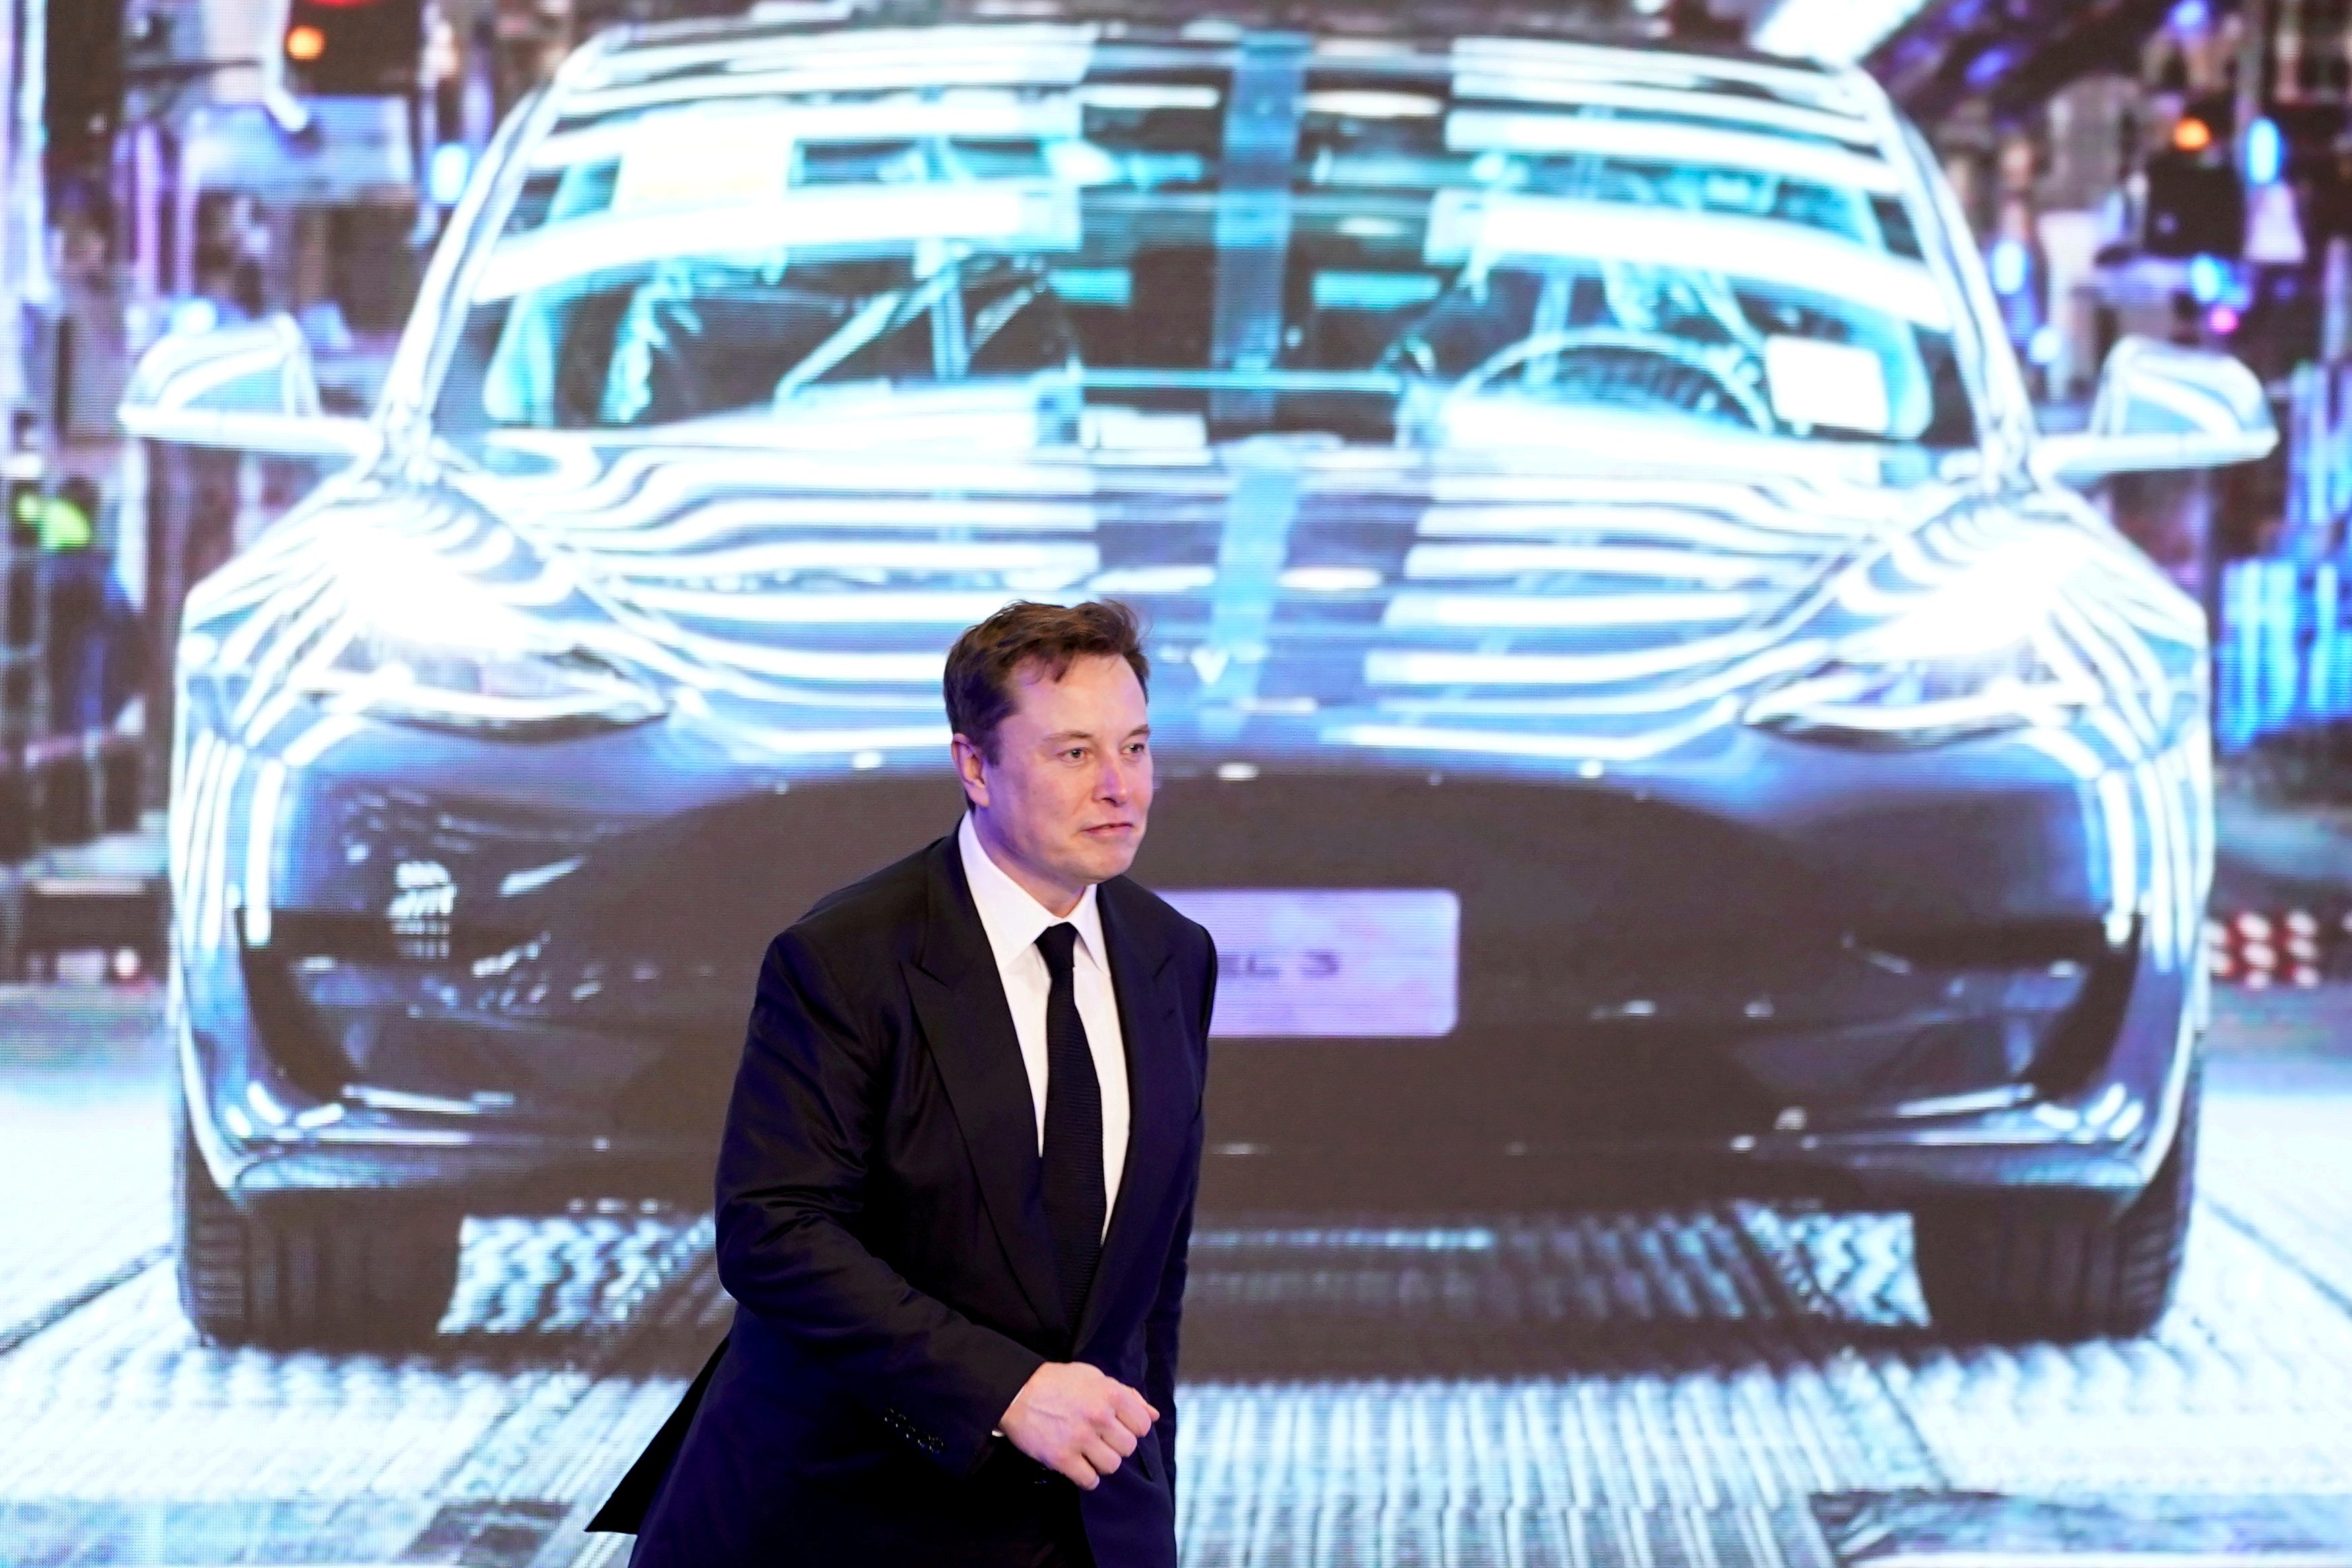 Twitter users say ‘yes’ to Musk’s proposal to sell 10% of his Tesla stock